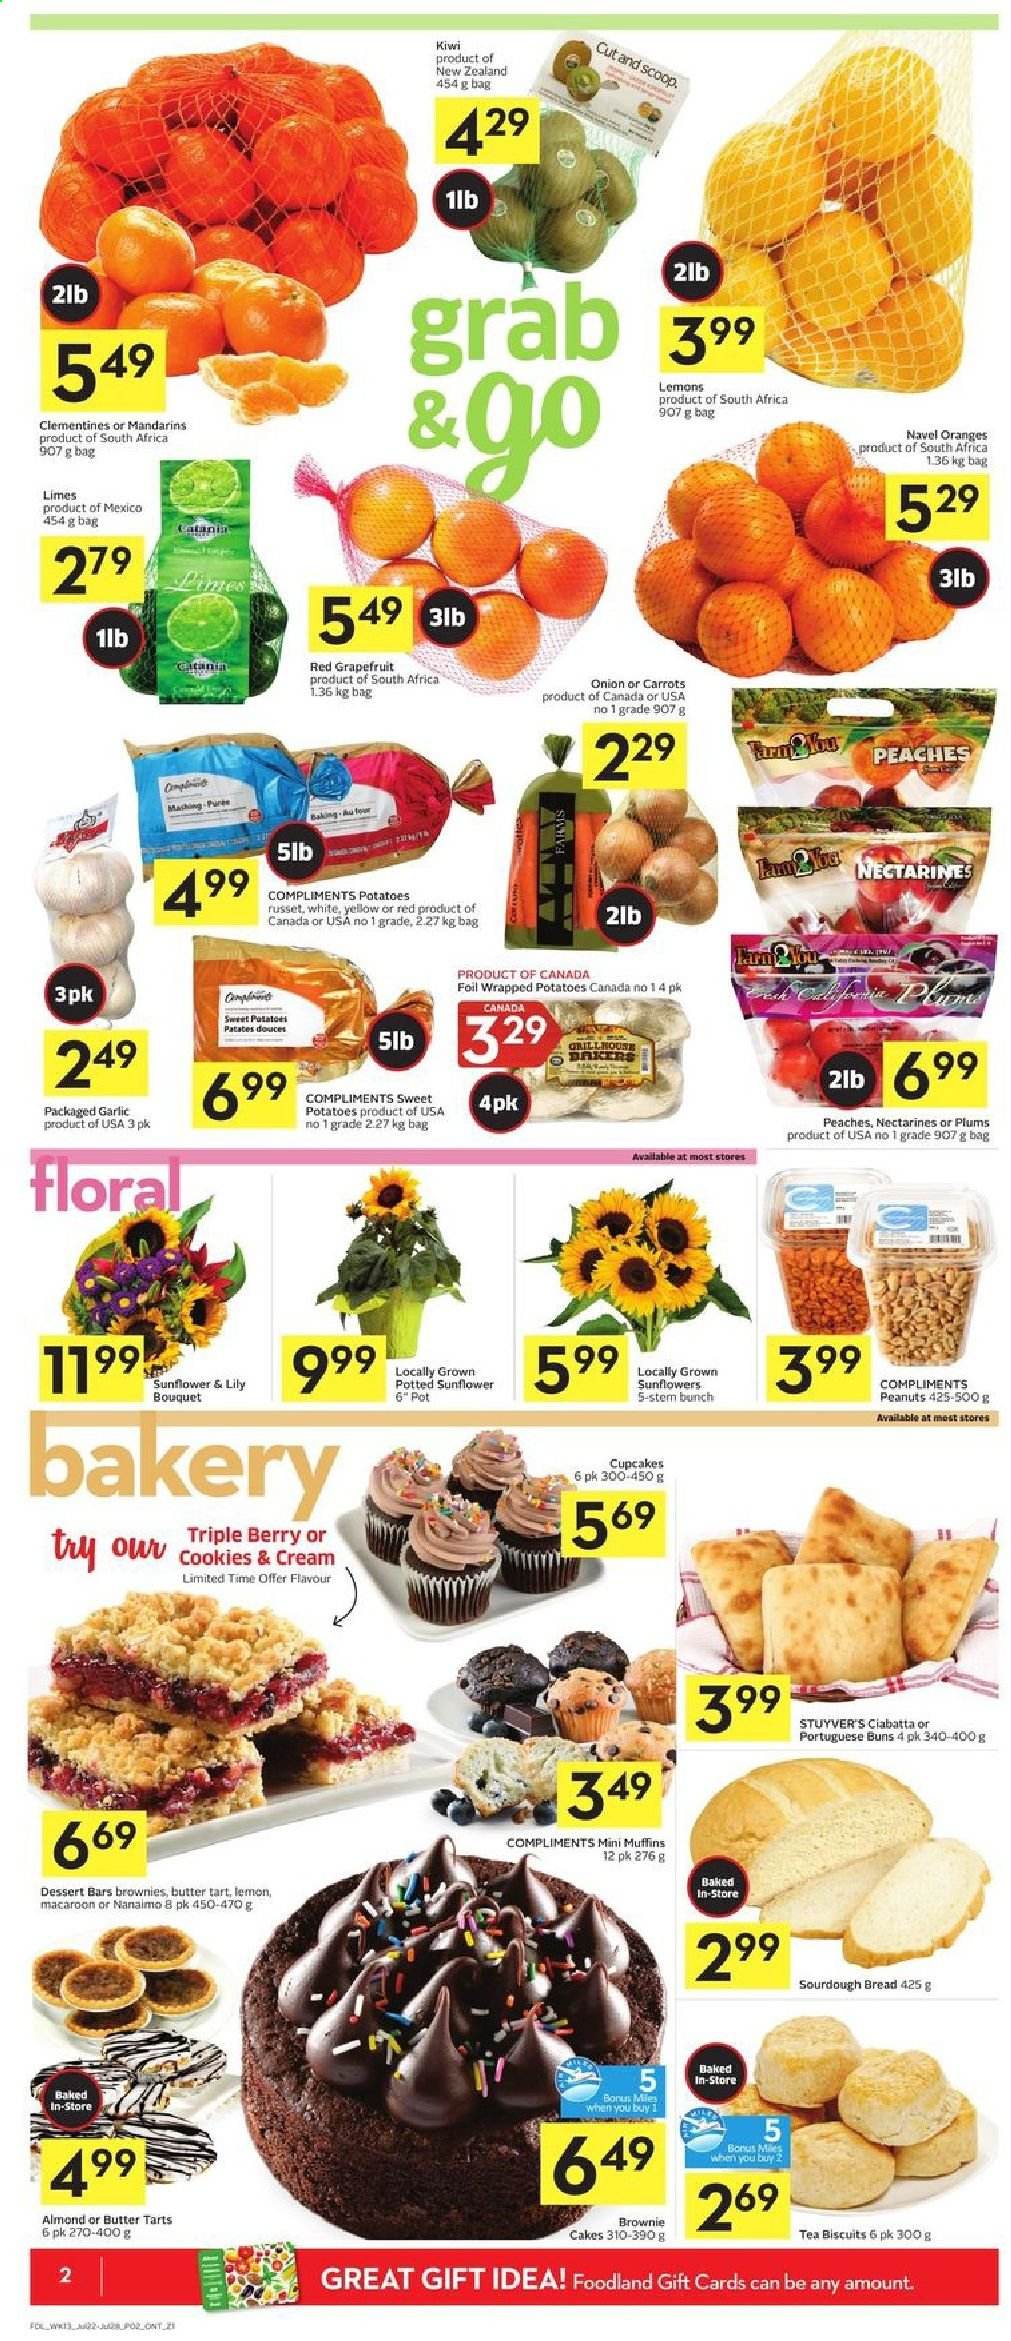 thumbnail - Foodland Flyer - July 22, 2021 - July 28, 2021 - Sales products - bread, cake, tart, buns, sourdough bread, cupcake, muffin, carrots, garlic, russet potatoes, potatoes, onion, clementines, grapefruits, limes, mandarines, nectarines, plums, lemons, peaches, navel oranges, butter, cookies, biscuit, peanuts, tea, kiwi. Page 2.